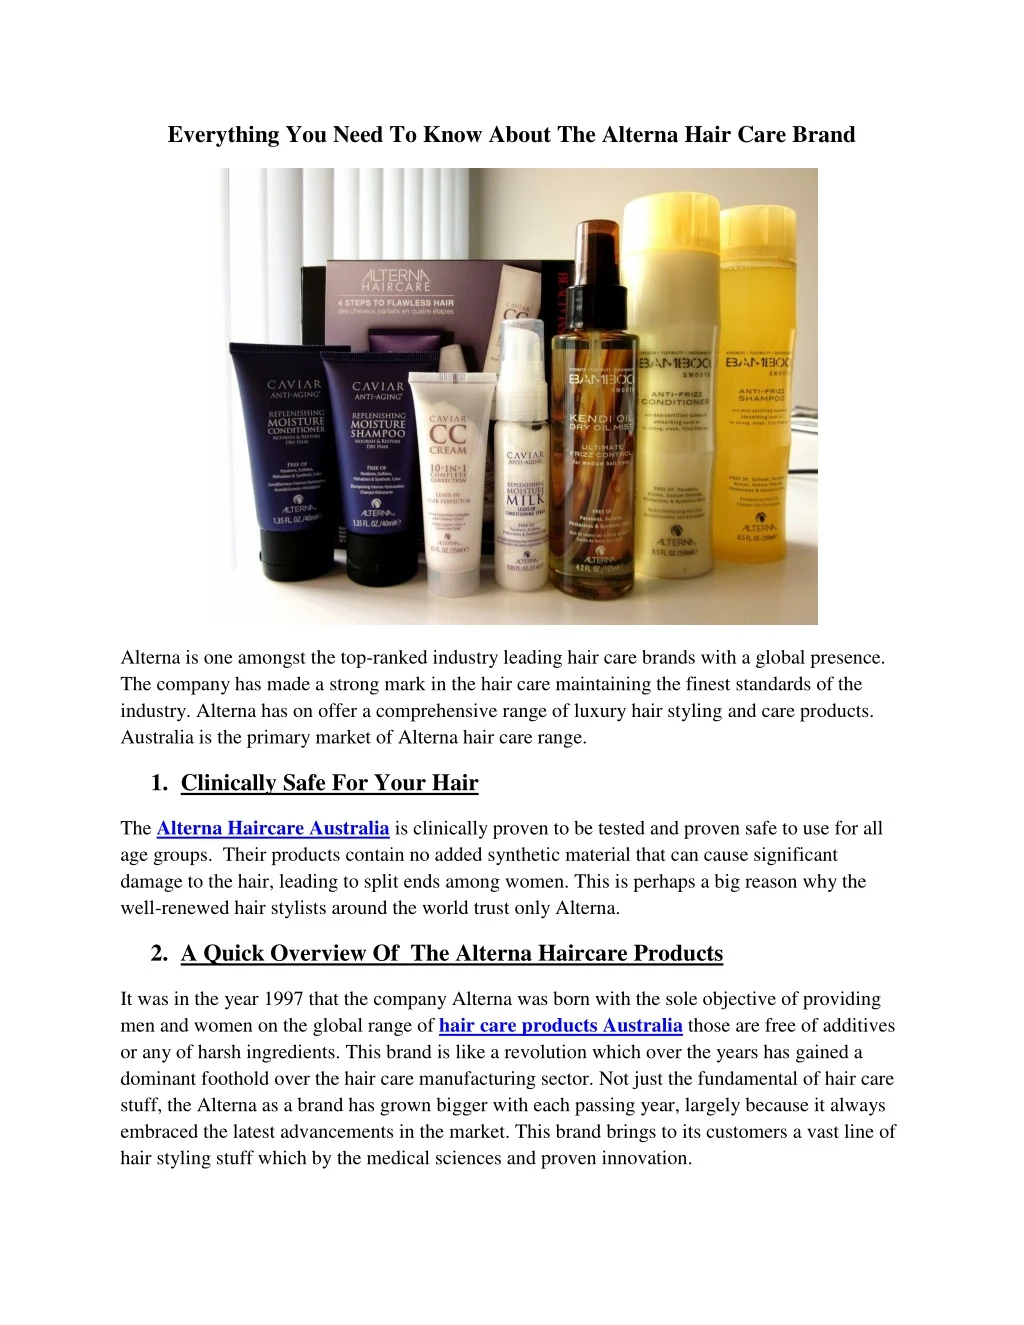 everything you need to know about the alterna